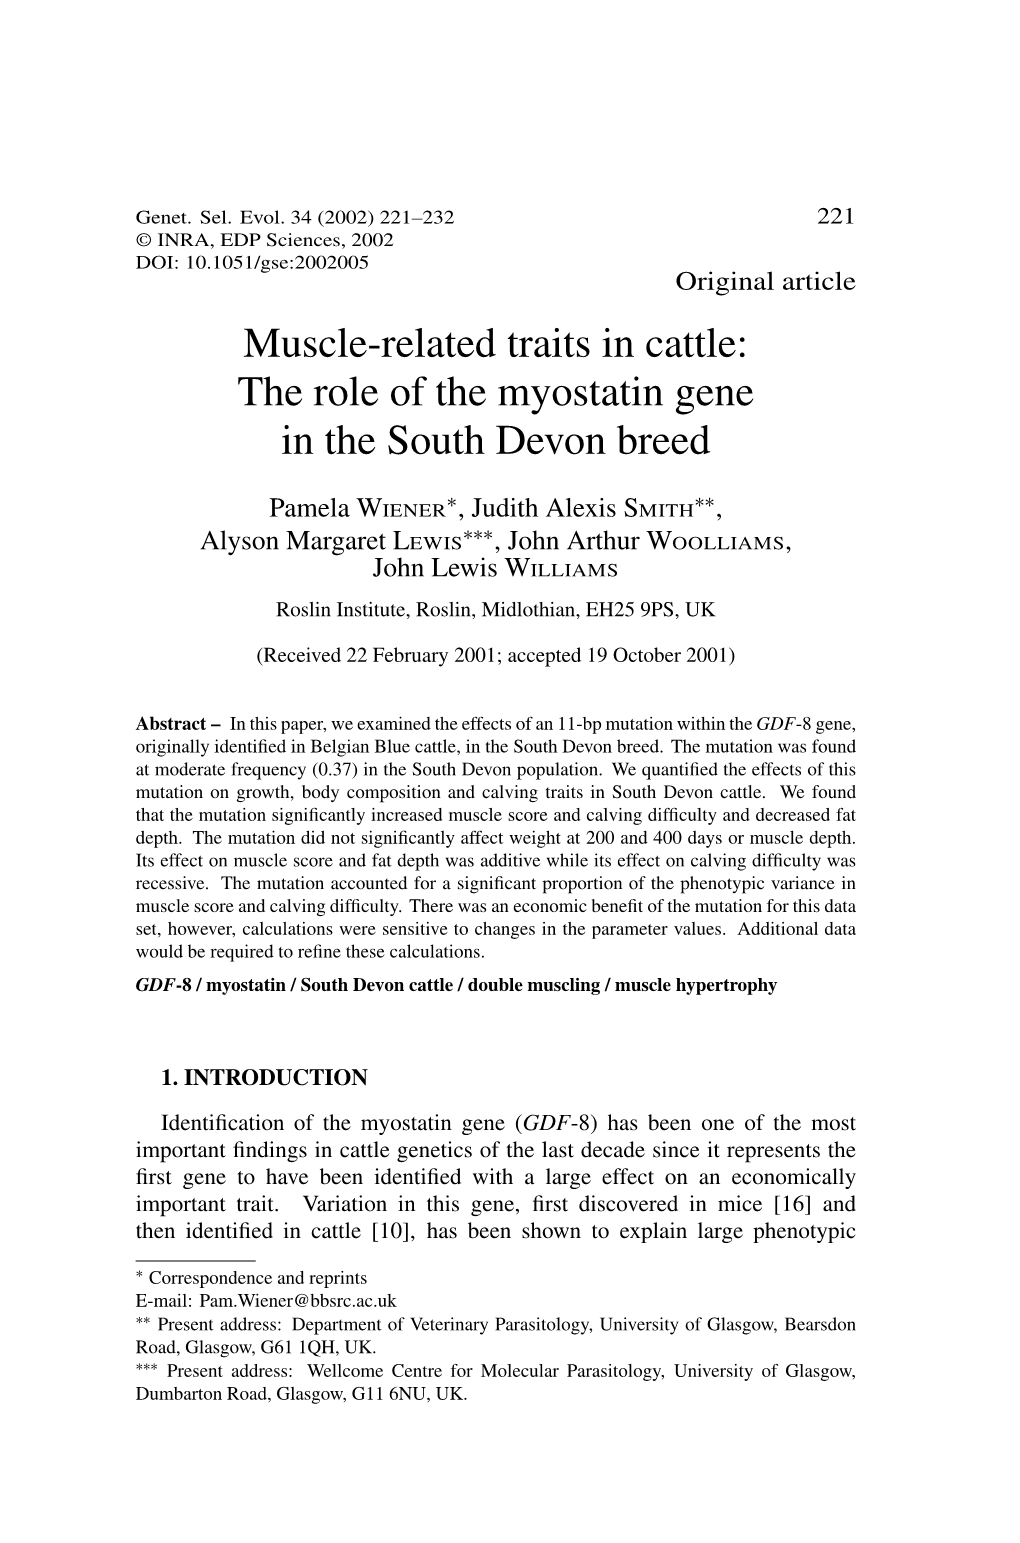 The Role of the Myostatin Gene in the South Devon Breed